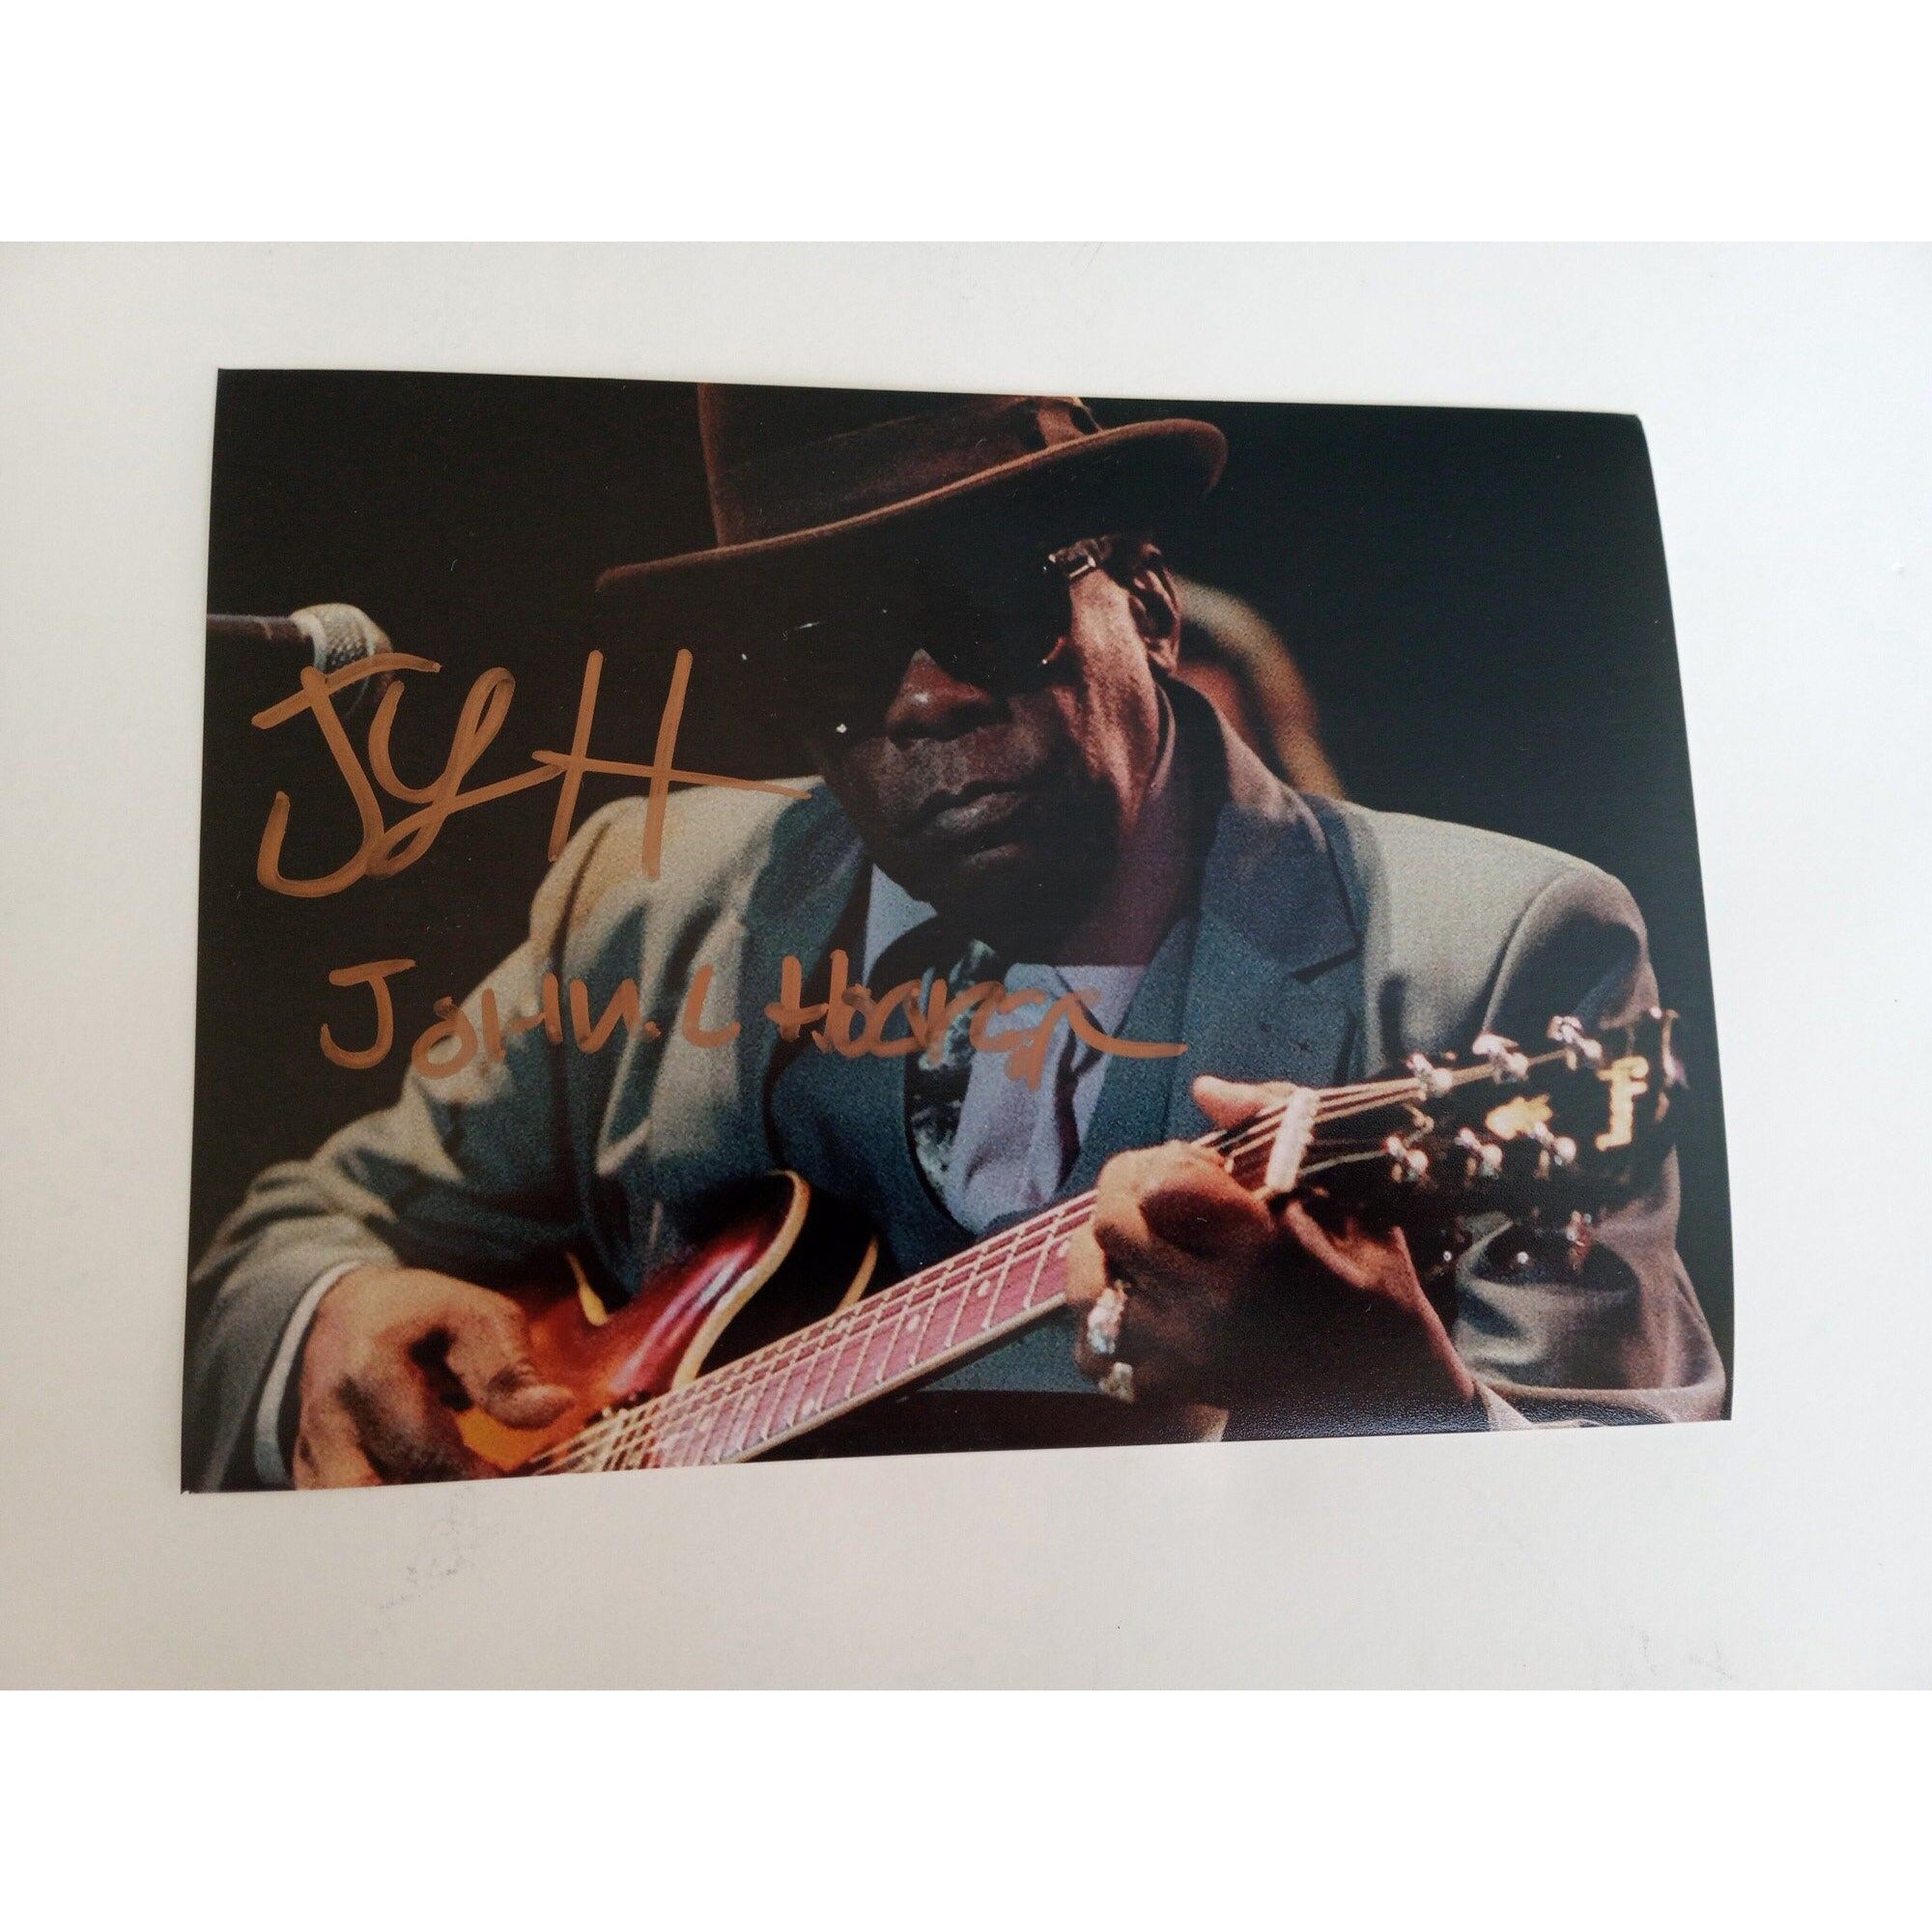 John Lee Hooker 5 x 7 photograph signed with proof